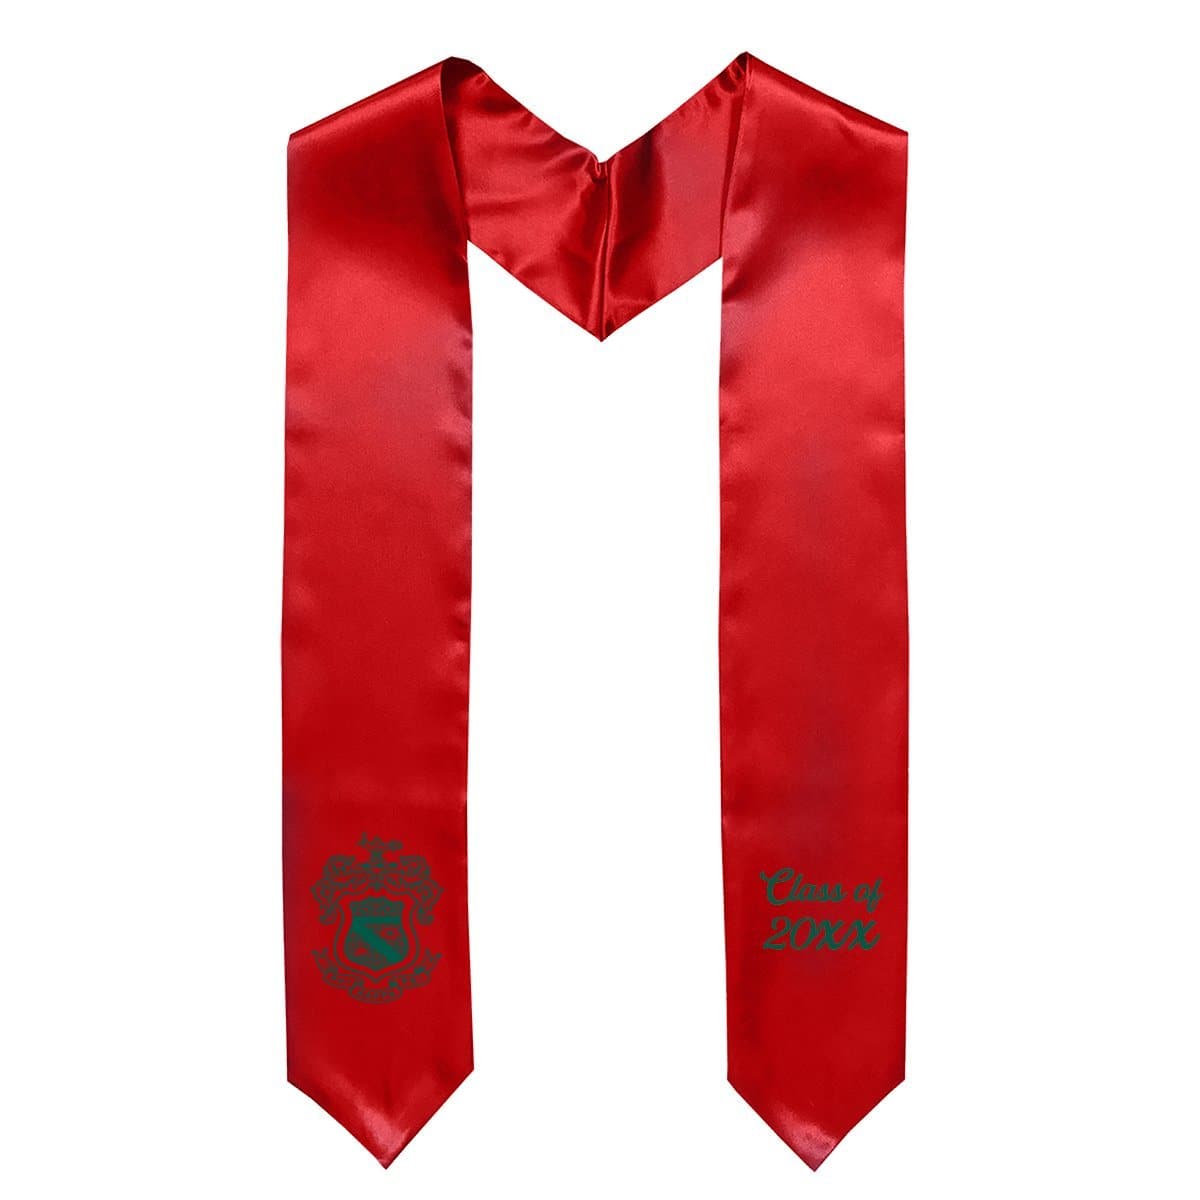 Phi Psi Embroidered Crest Graduation Stole | Phi Kappa Psi | Apparel > Stoles